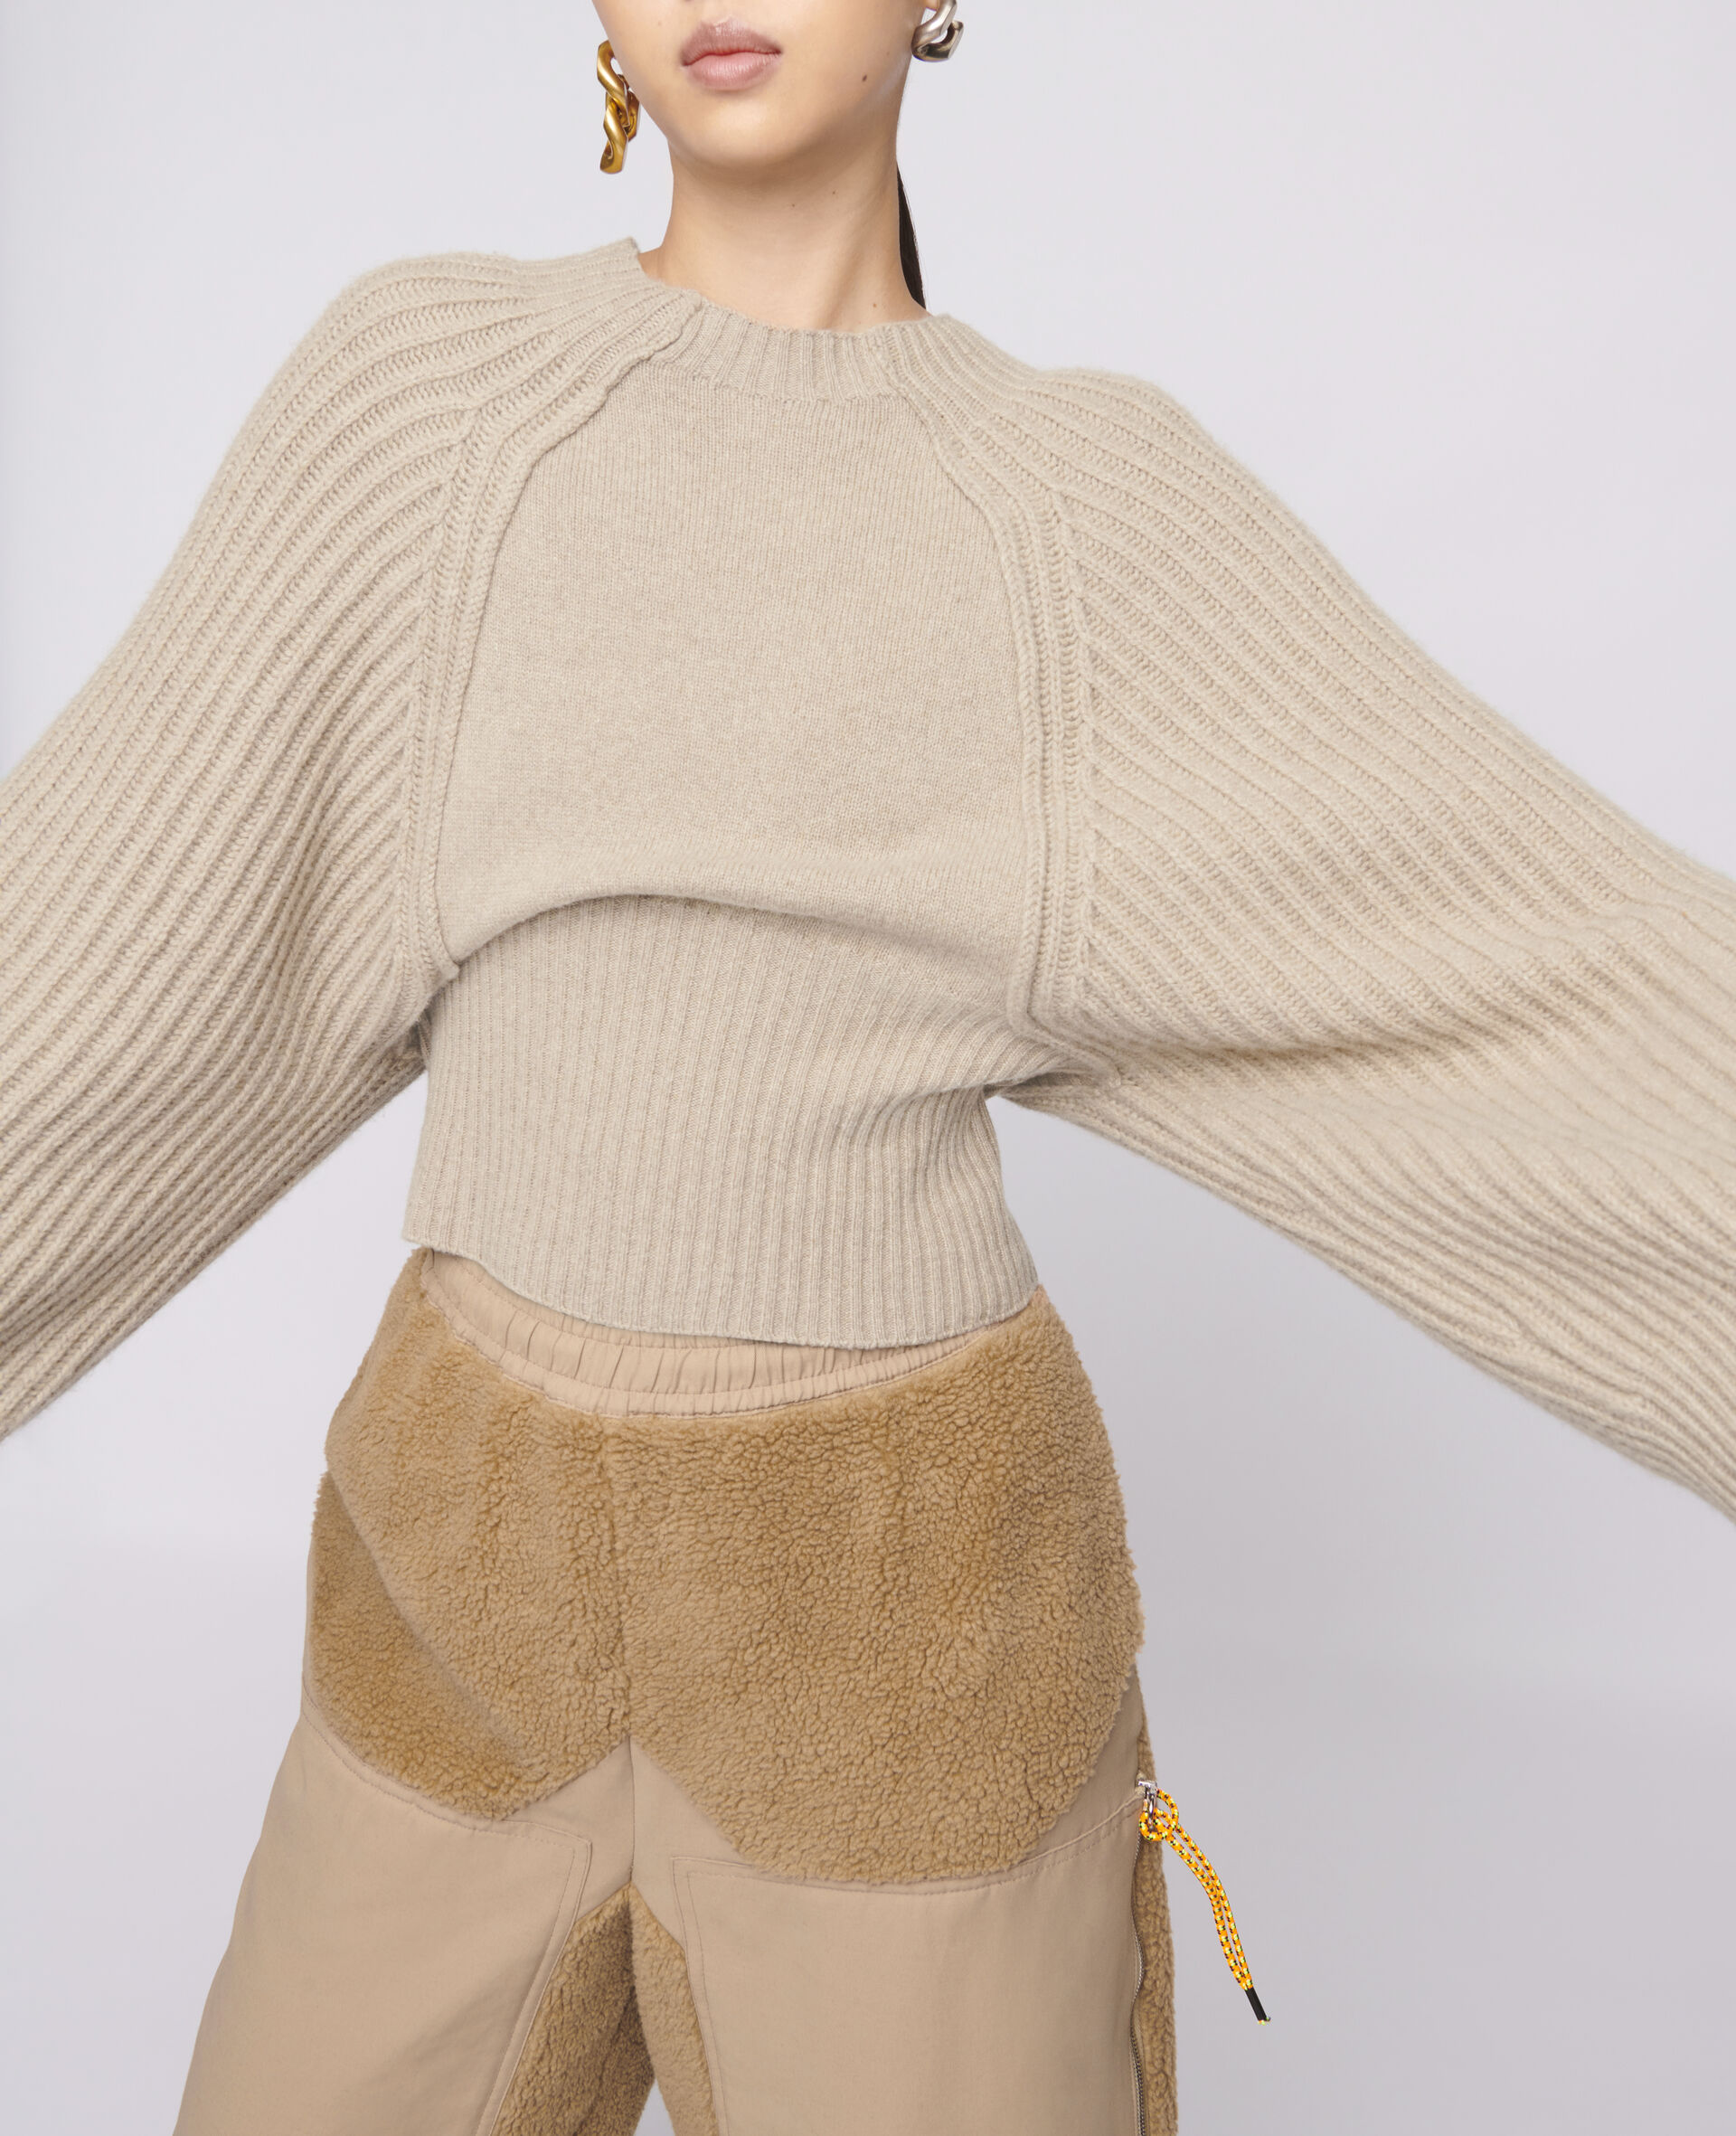 Cropped Knit Sweater -Beige-large image number 3